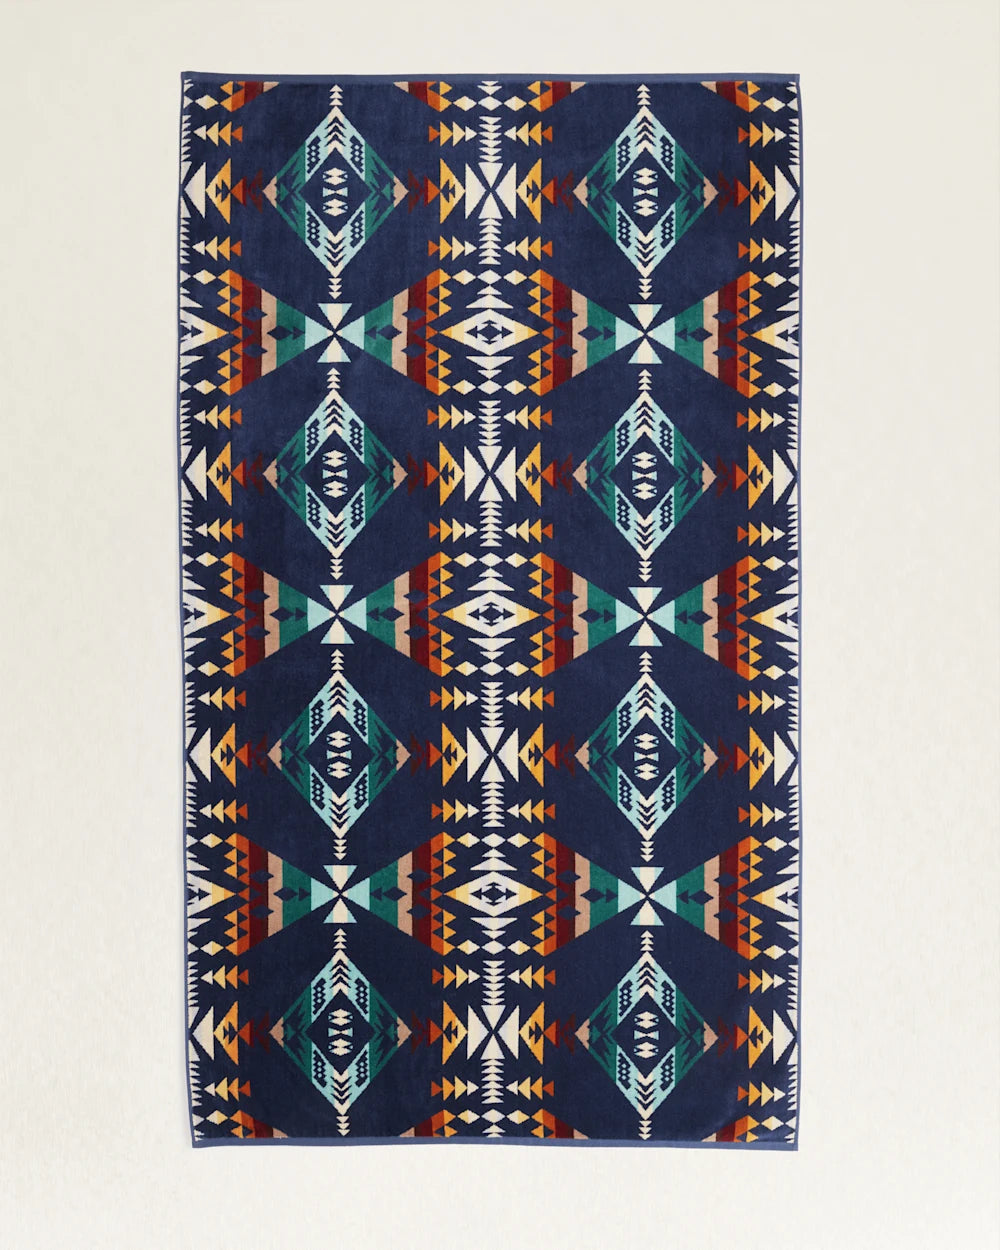 A symmetric patterned rug featuring a complex geometric design in shades of blue, black, orange, and white, displaying a traditional Scottsdale Arizona motif from Pendleton/Babblitt's Wholesale brand.